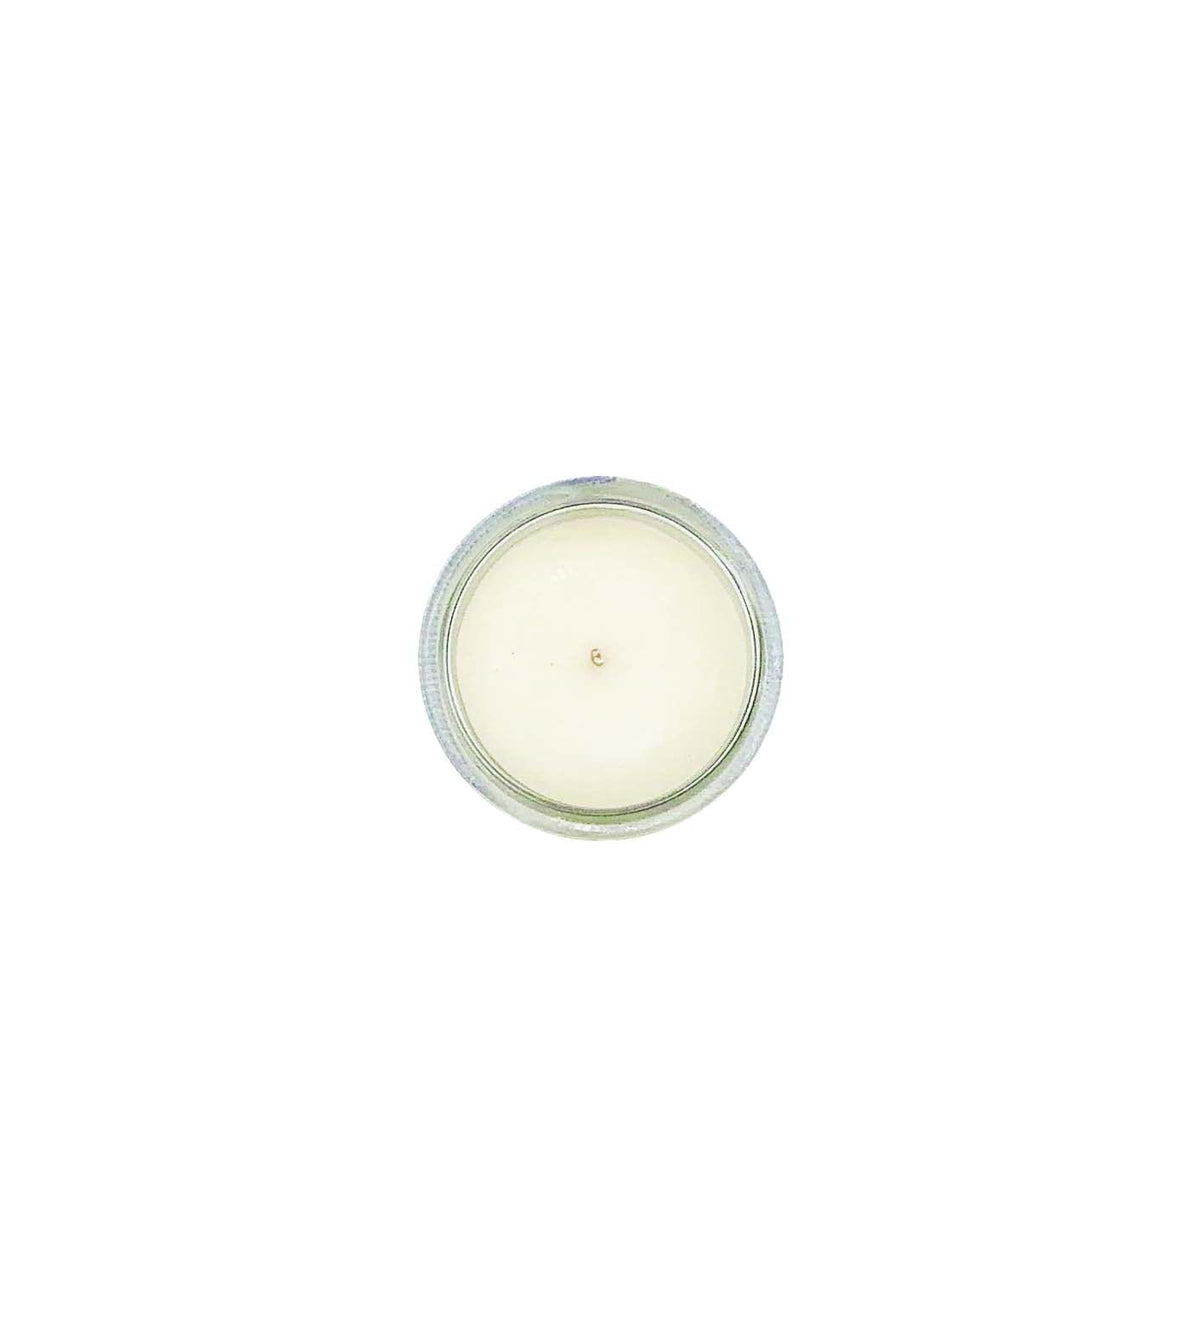 ACADIA SMALL CANDLE